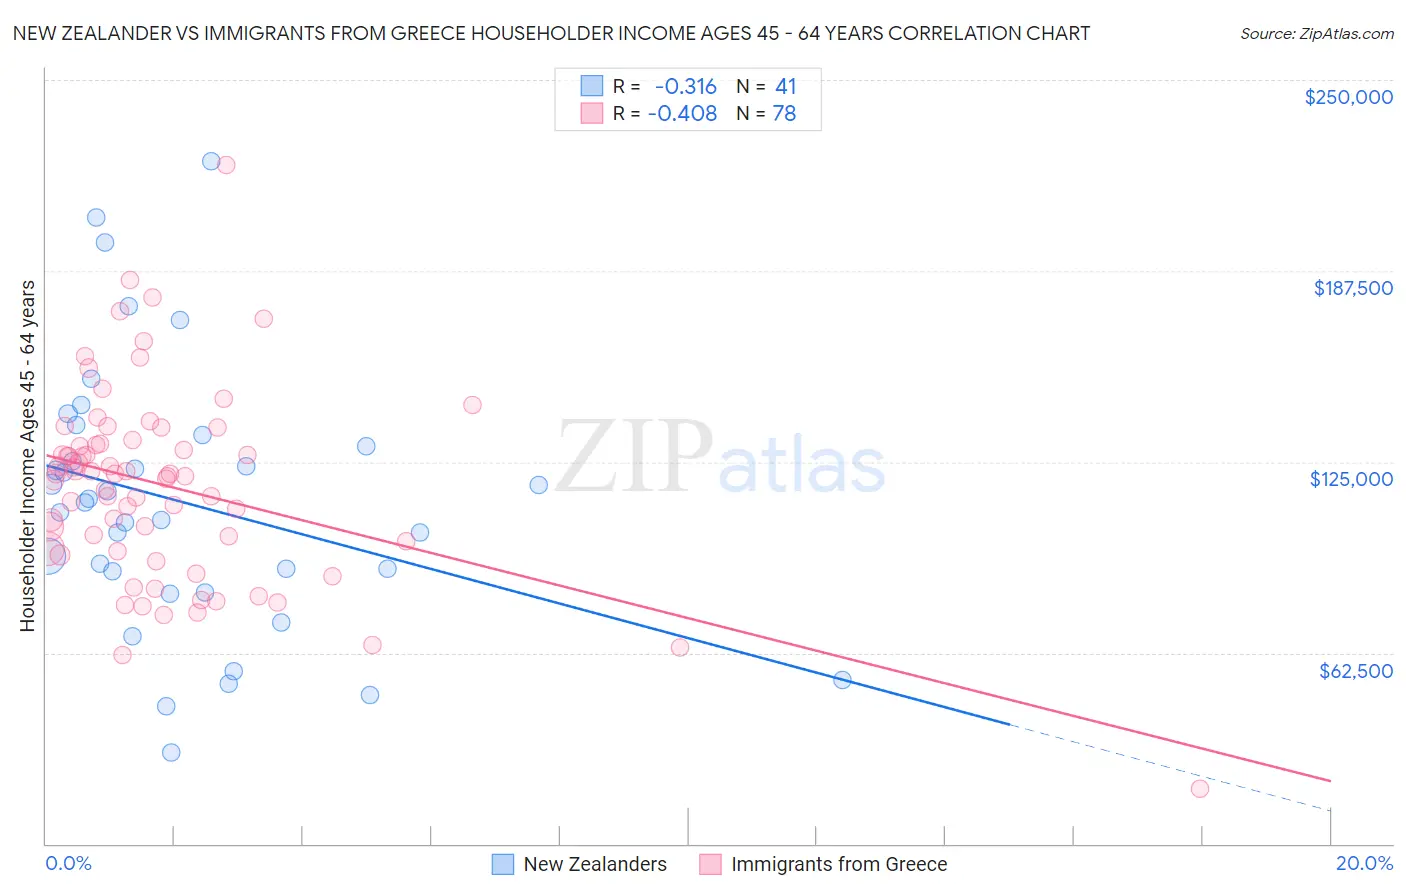 New Zealander vs Immigrants from Greece Householder Income Ages 45 - 64 years